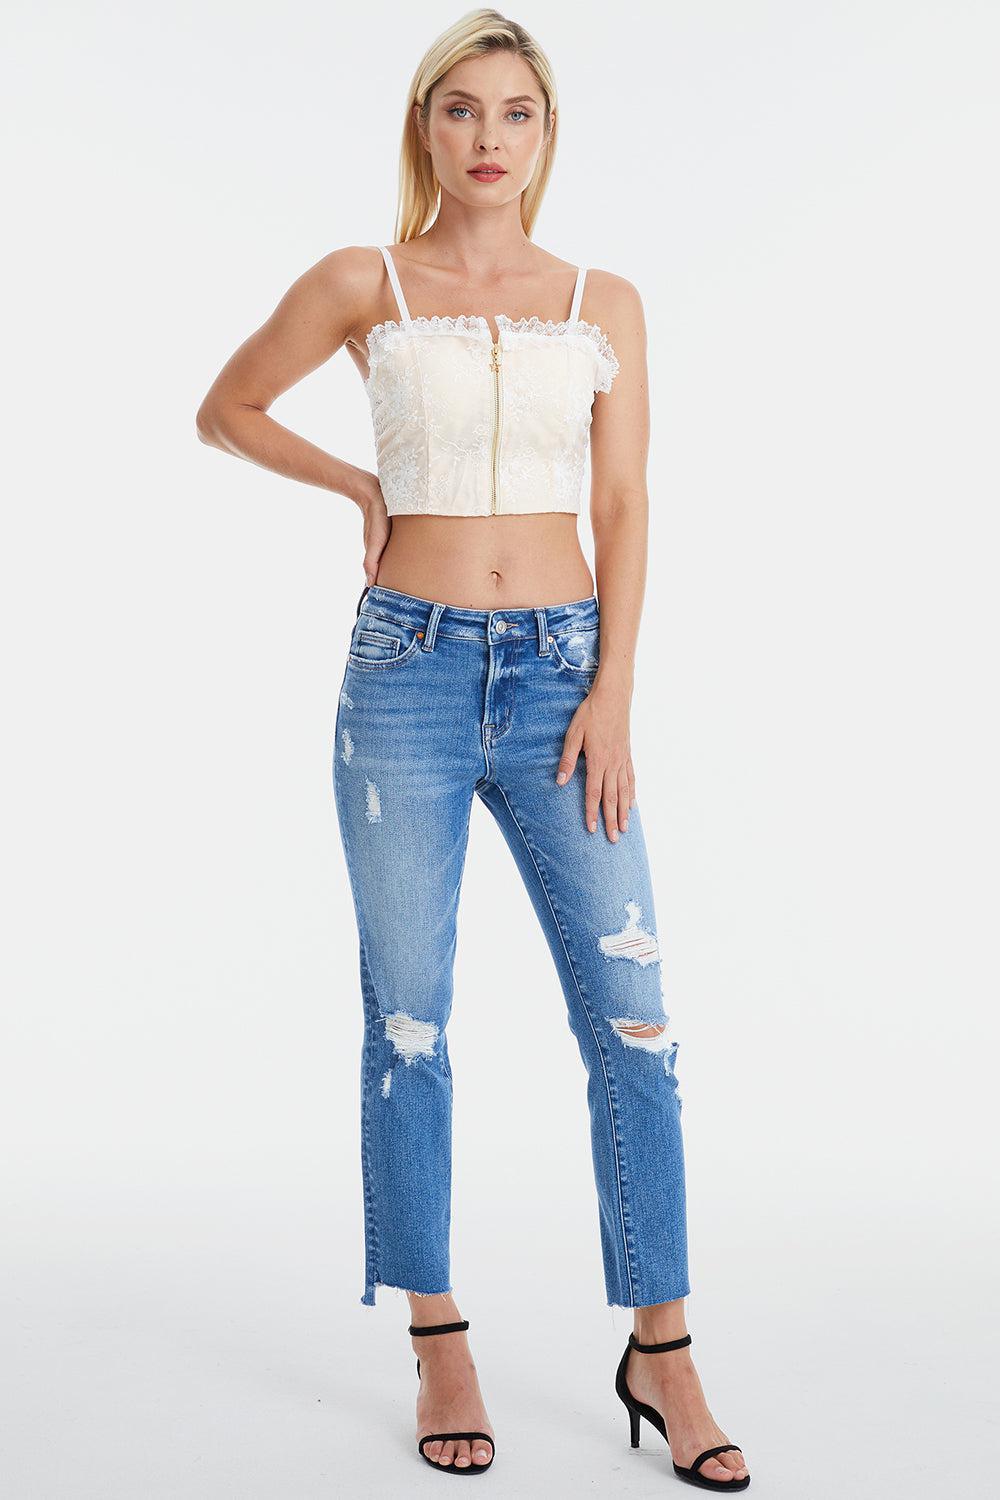 a woman wearing a crop top and jeans